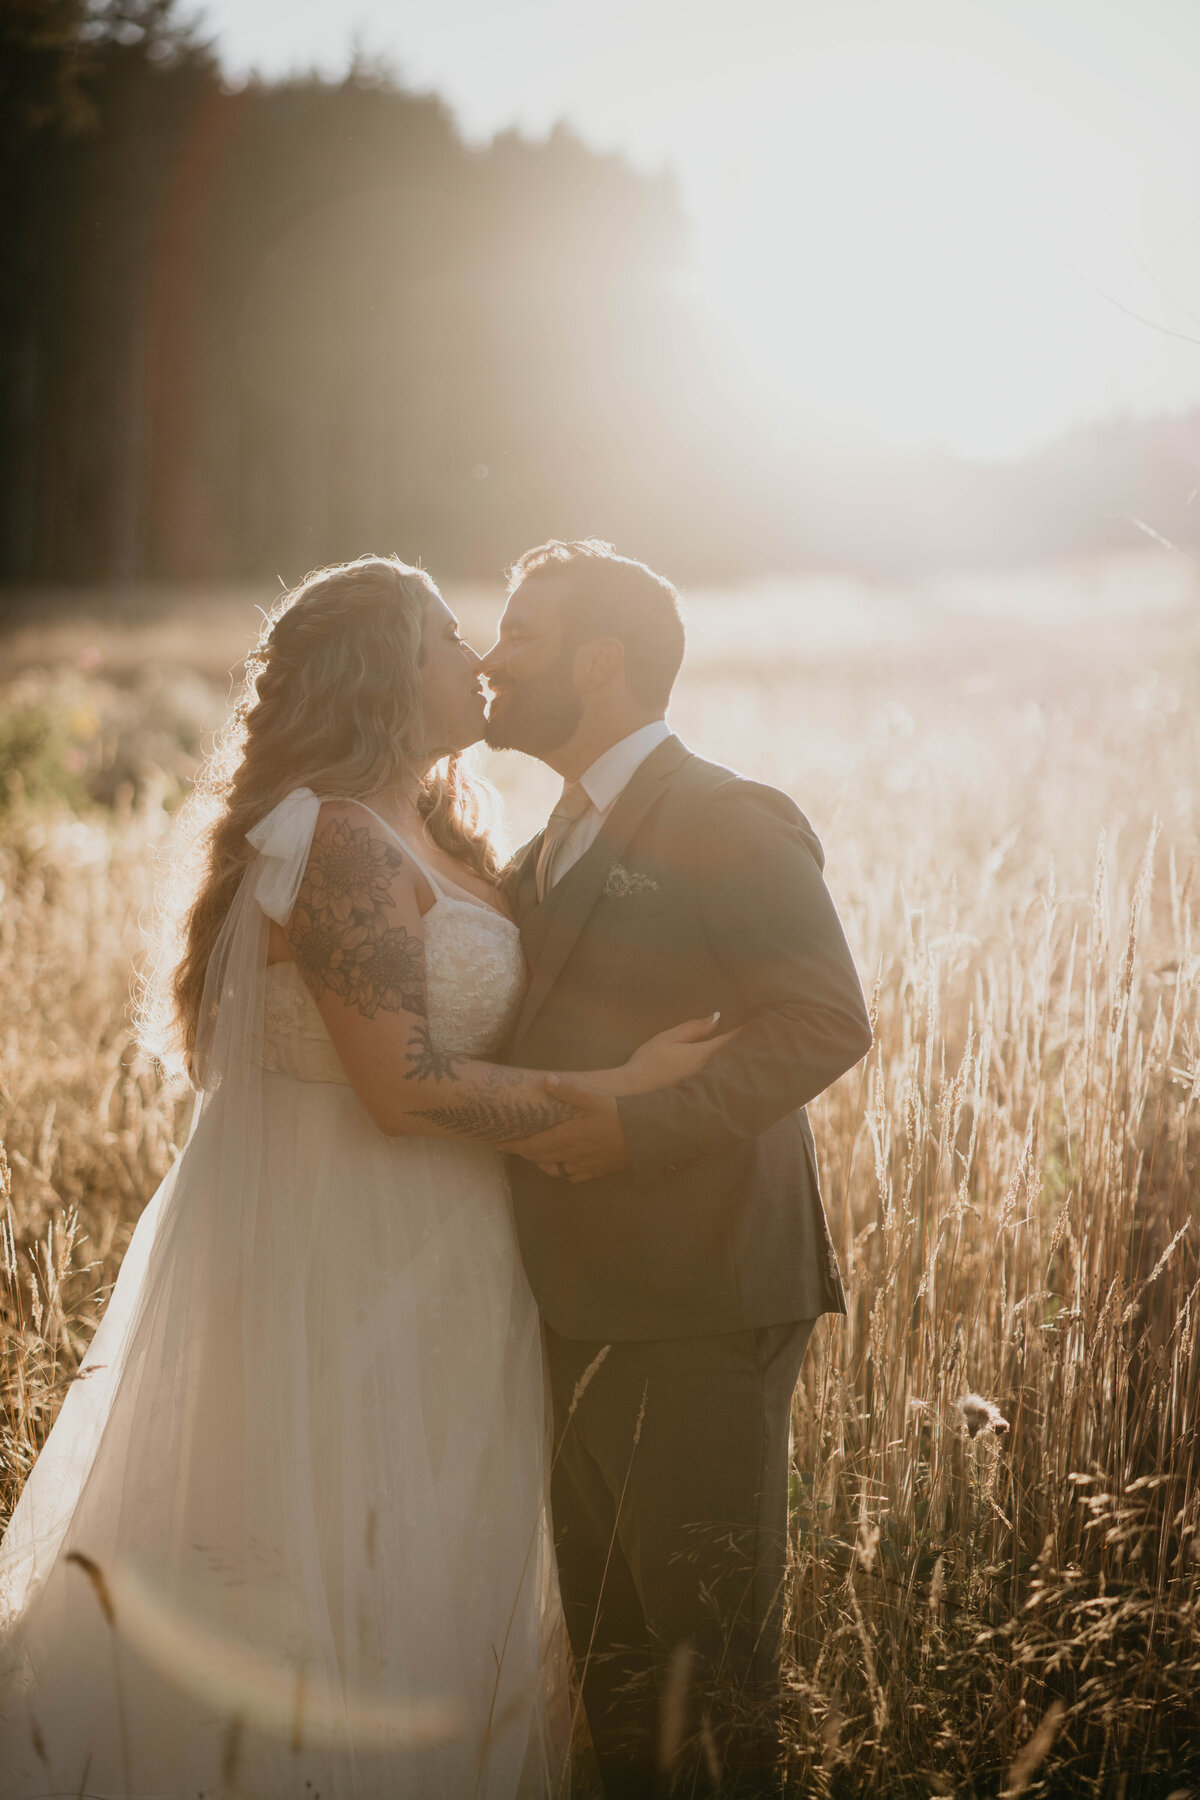 Bride and groom about to kiss at golden hour in a field after wedding